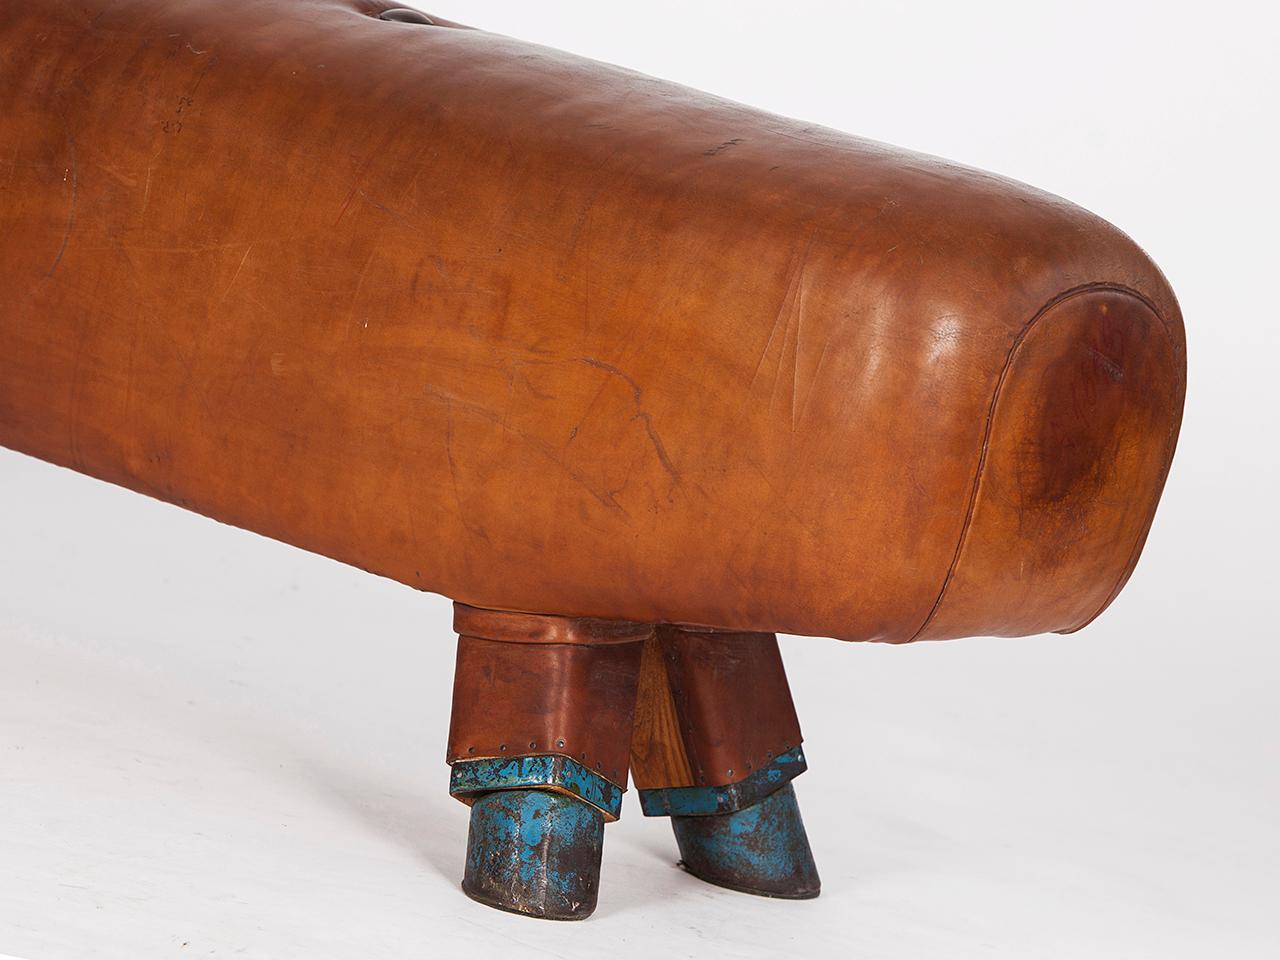 Pommel horse from former Czechoslovakia from the 1930s with beautiful patina, shortened to bench height 52cm and very good vintage condition. Completely restored. The iron feet are preserved. The thick leather has been cleaned and preserved. All of